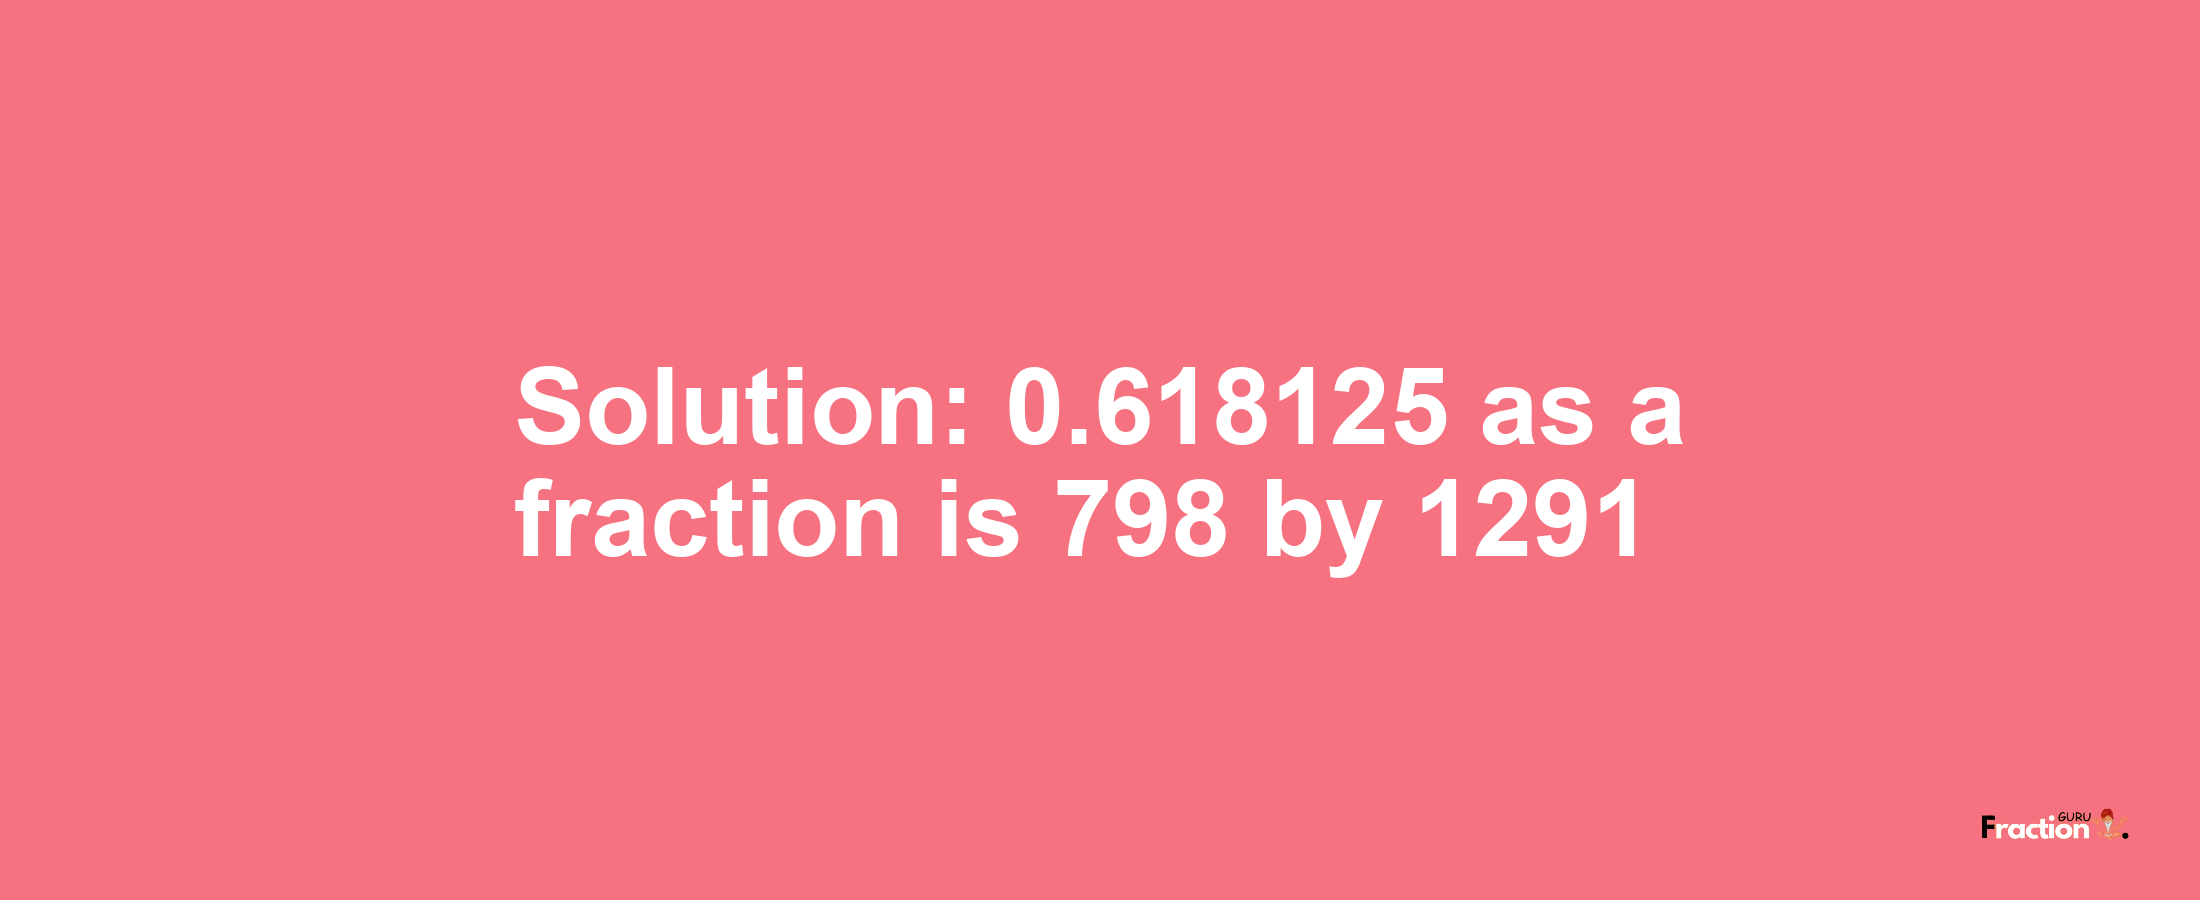 Solution:0.618125 as a fraction is 798/1291